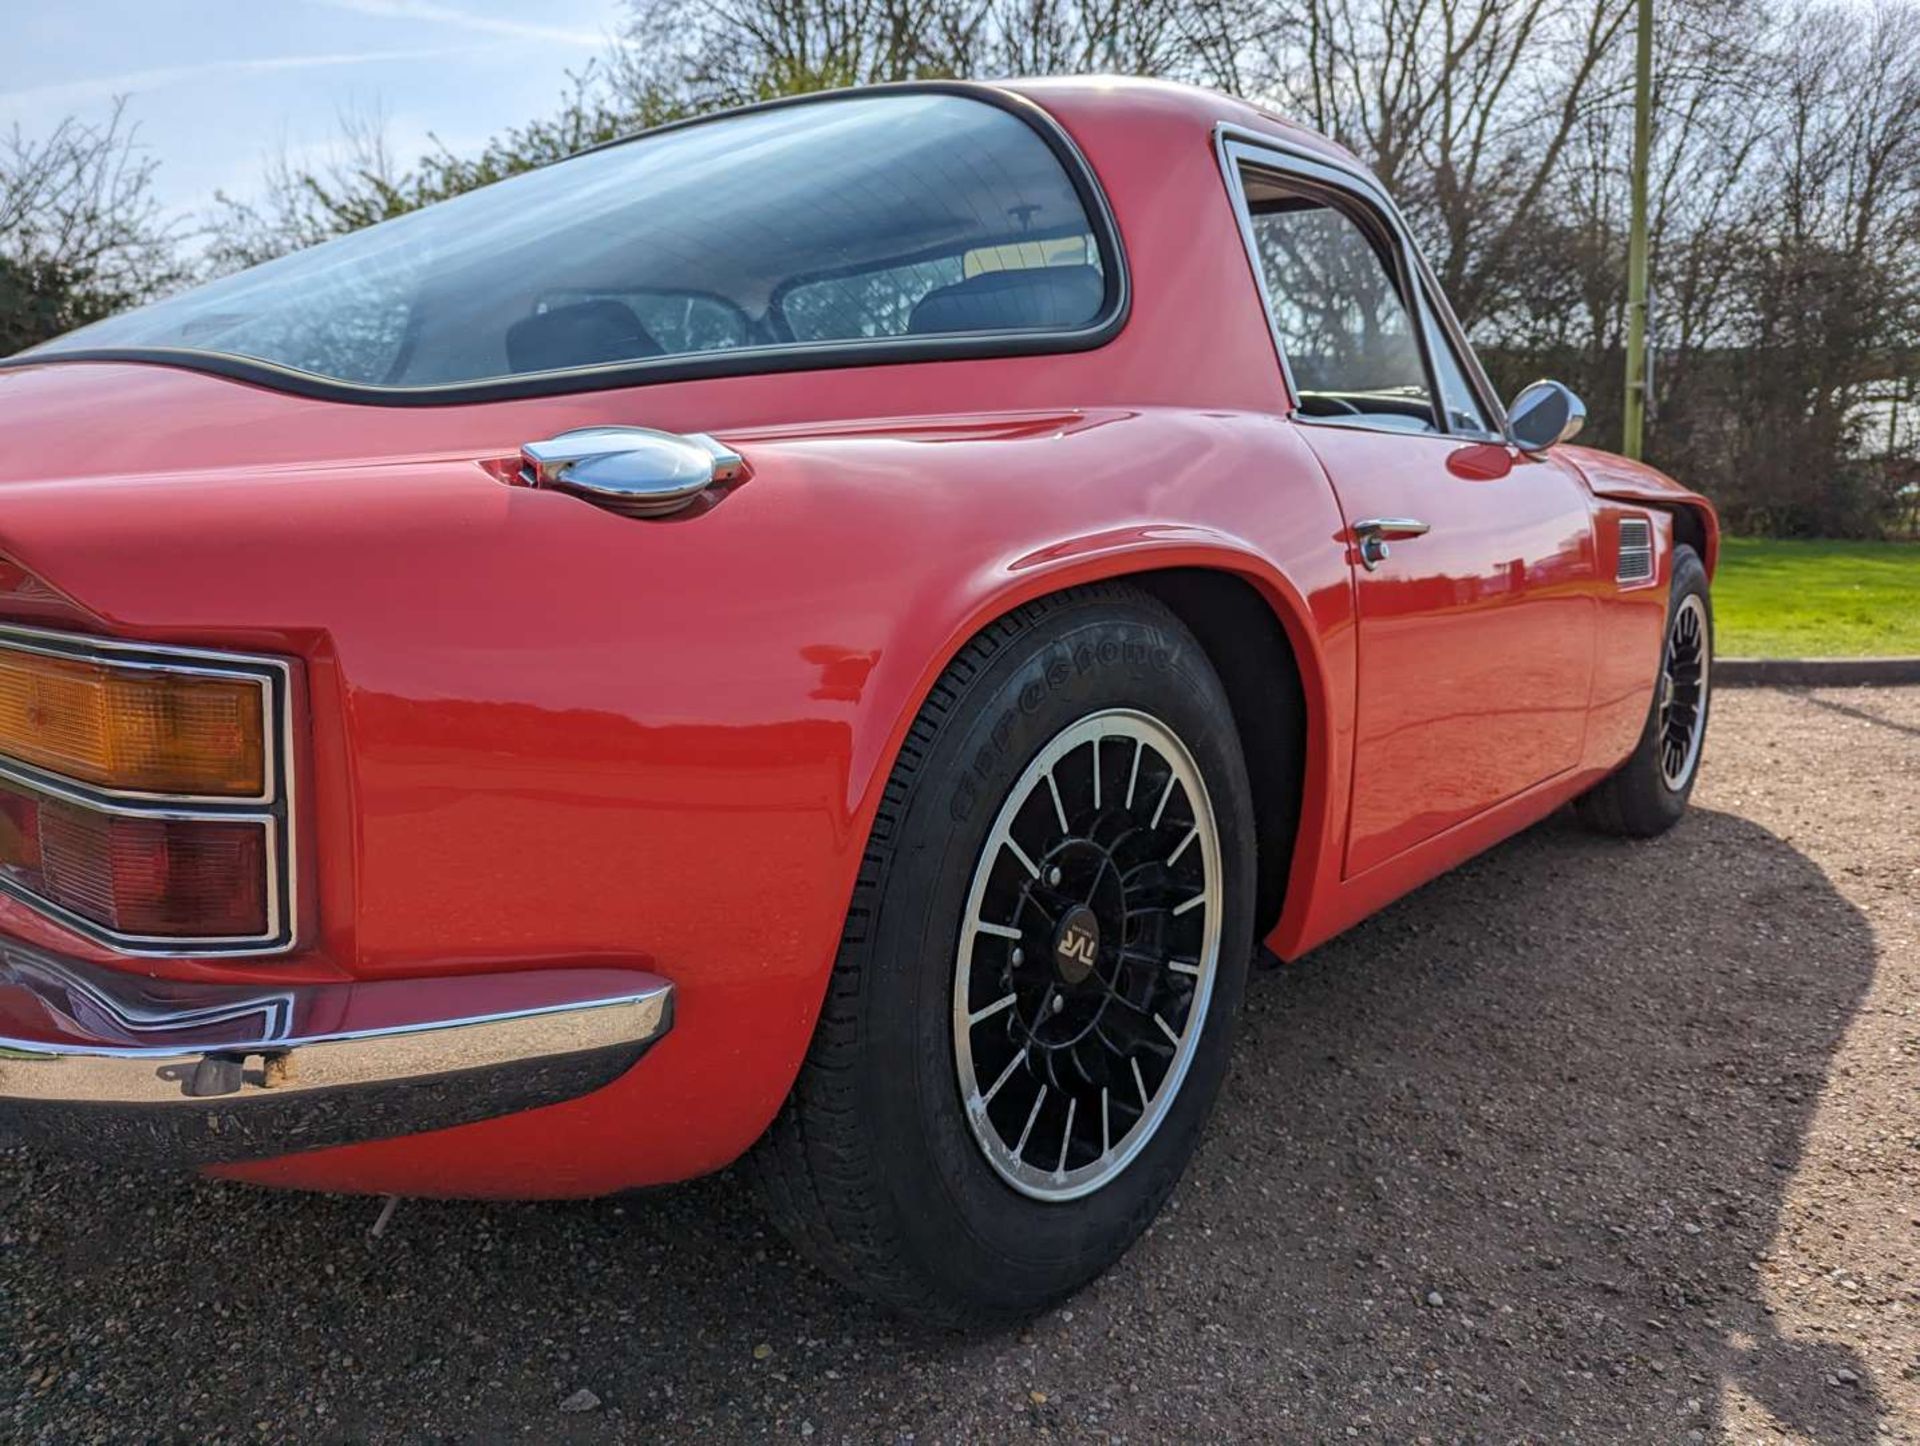 1972 TVR 2500M - Image 10 of 27